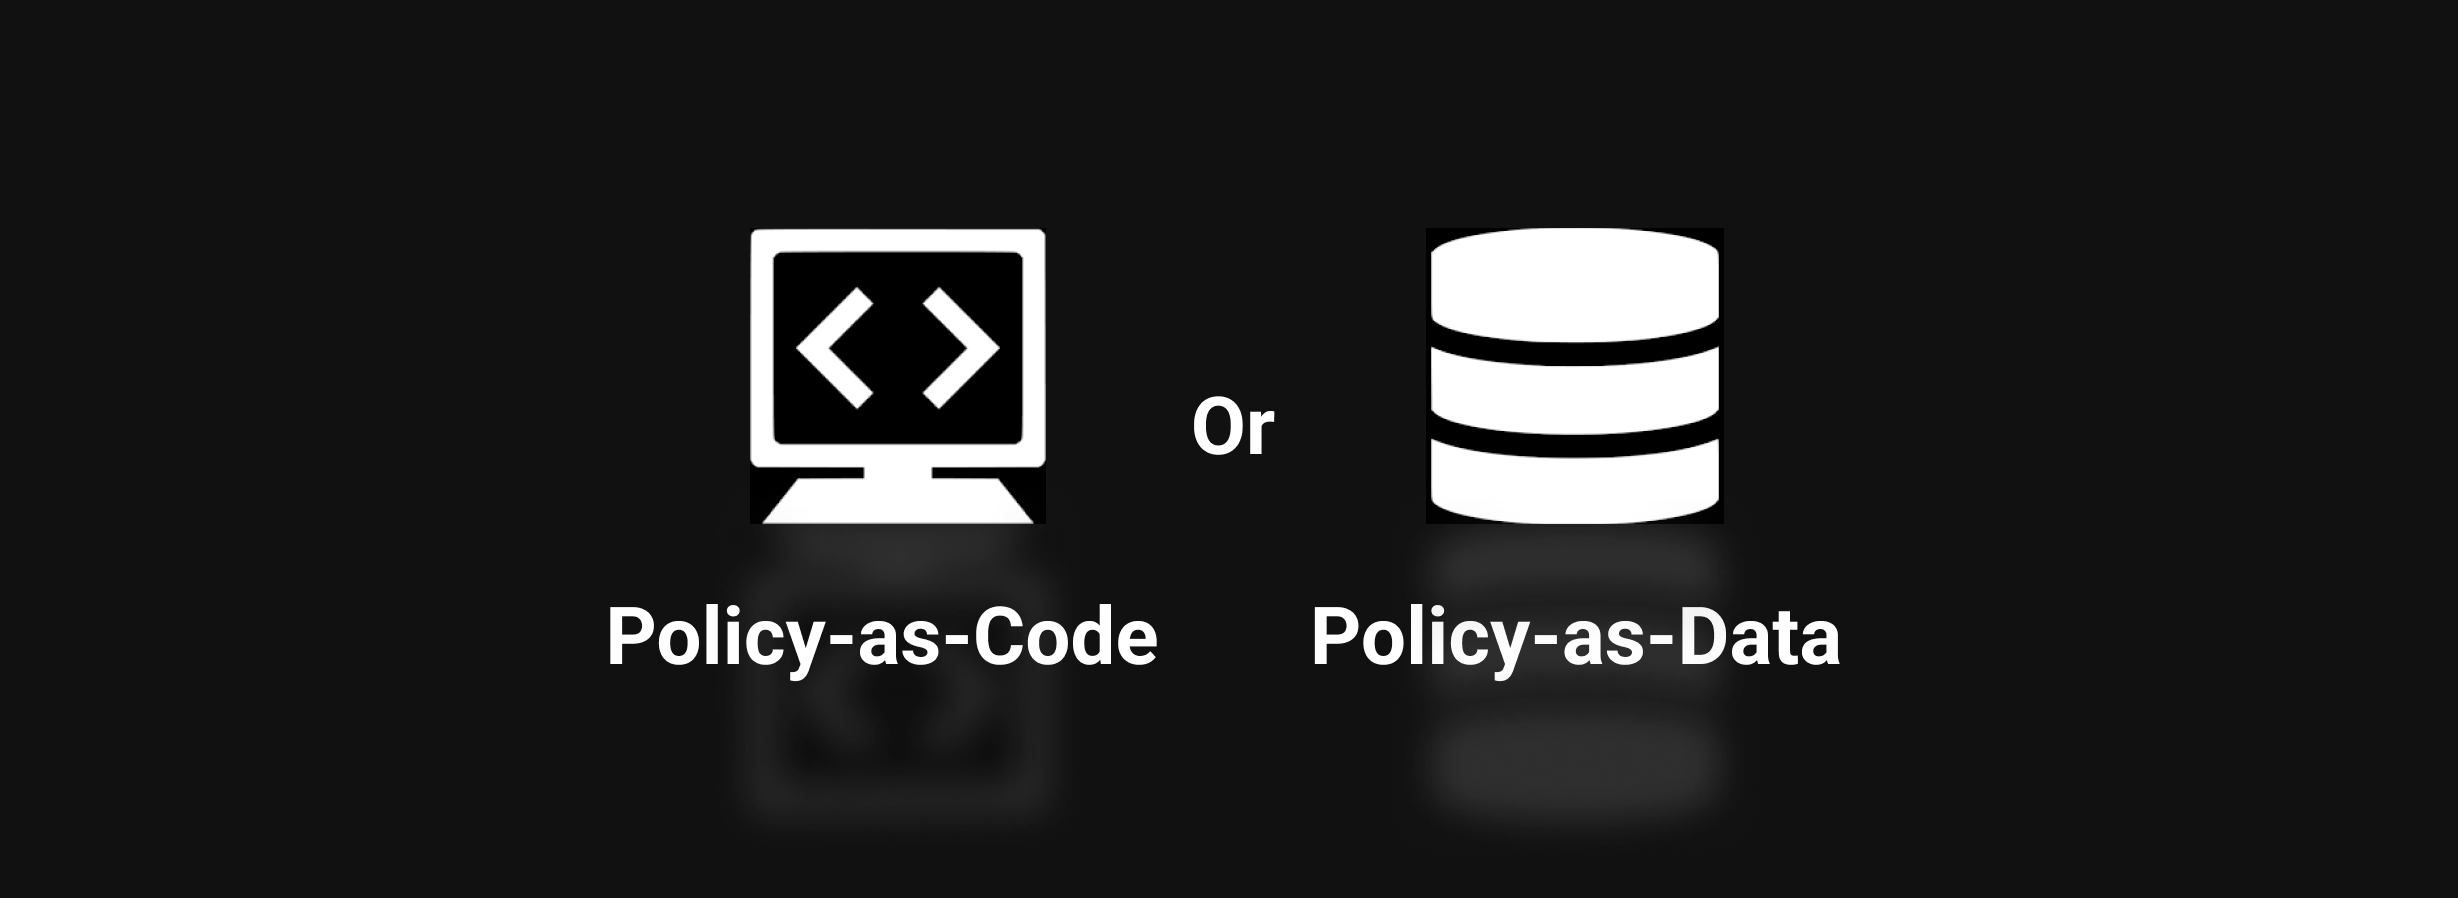 Policy-as-code or policy-as-data